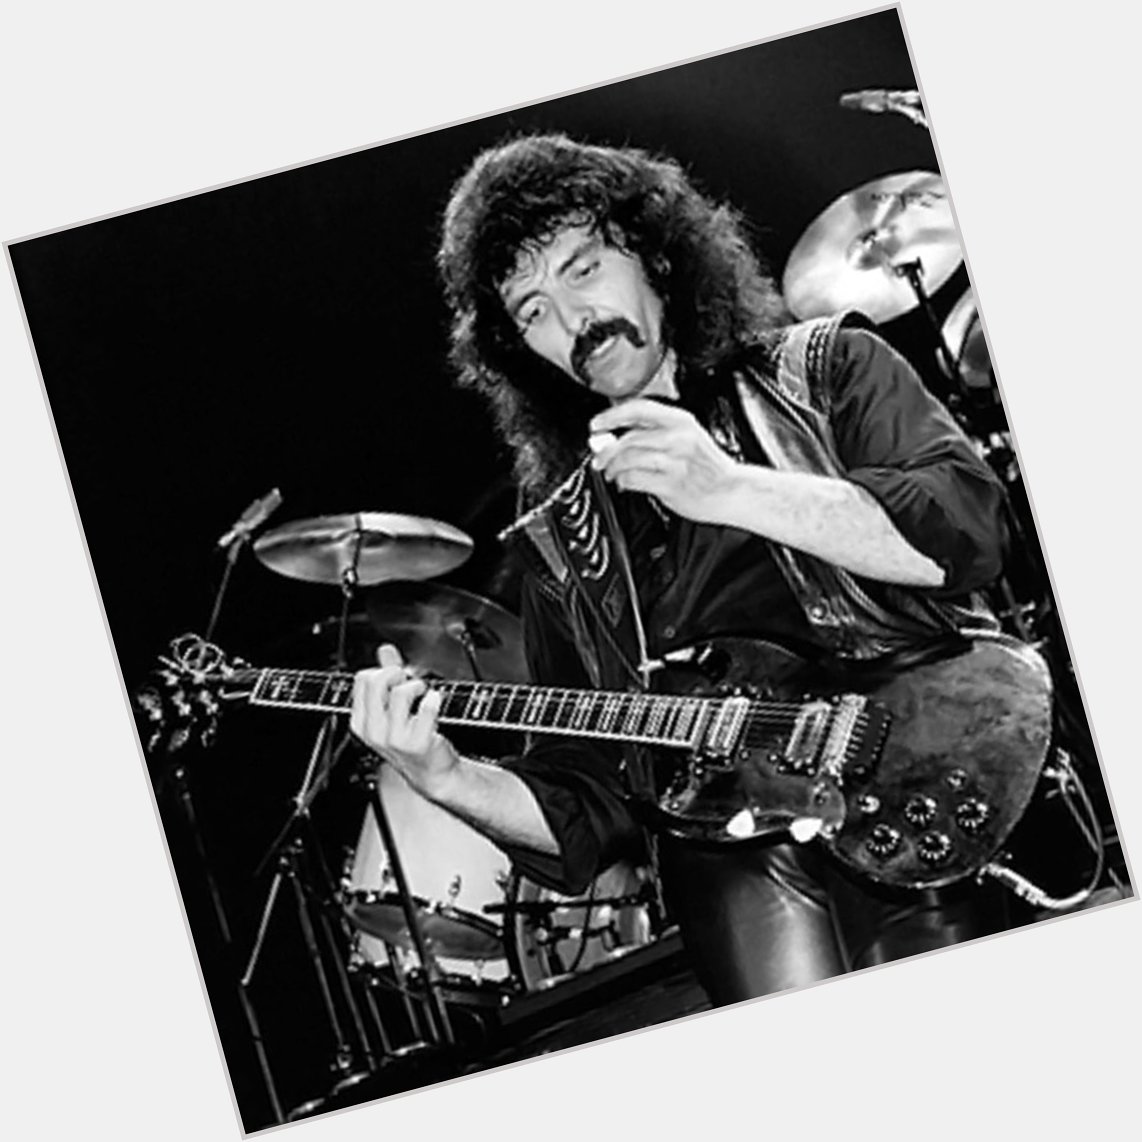 Tony Iommi is what every guitarist wanted to look like in the 70 s. Happy bday 